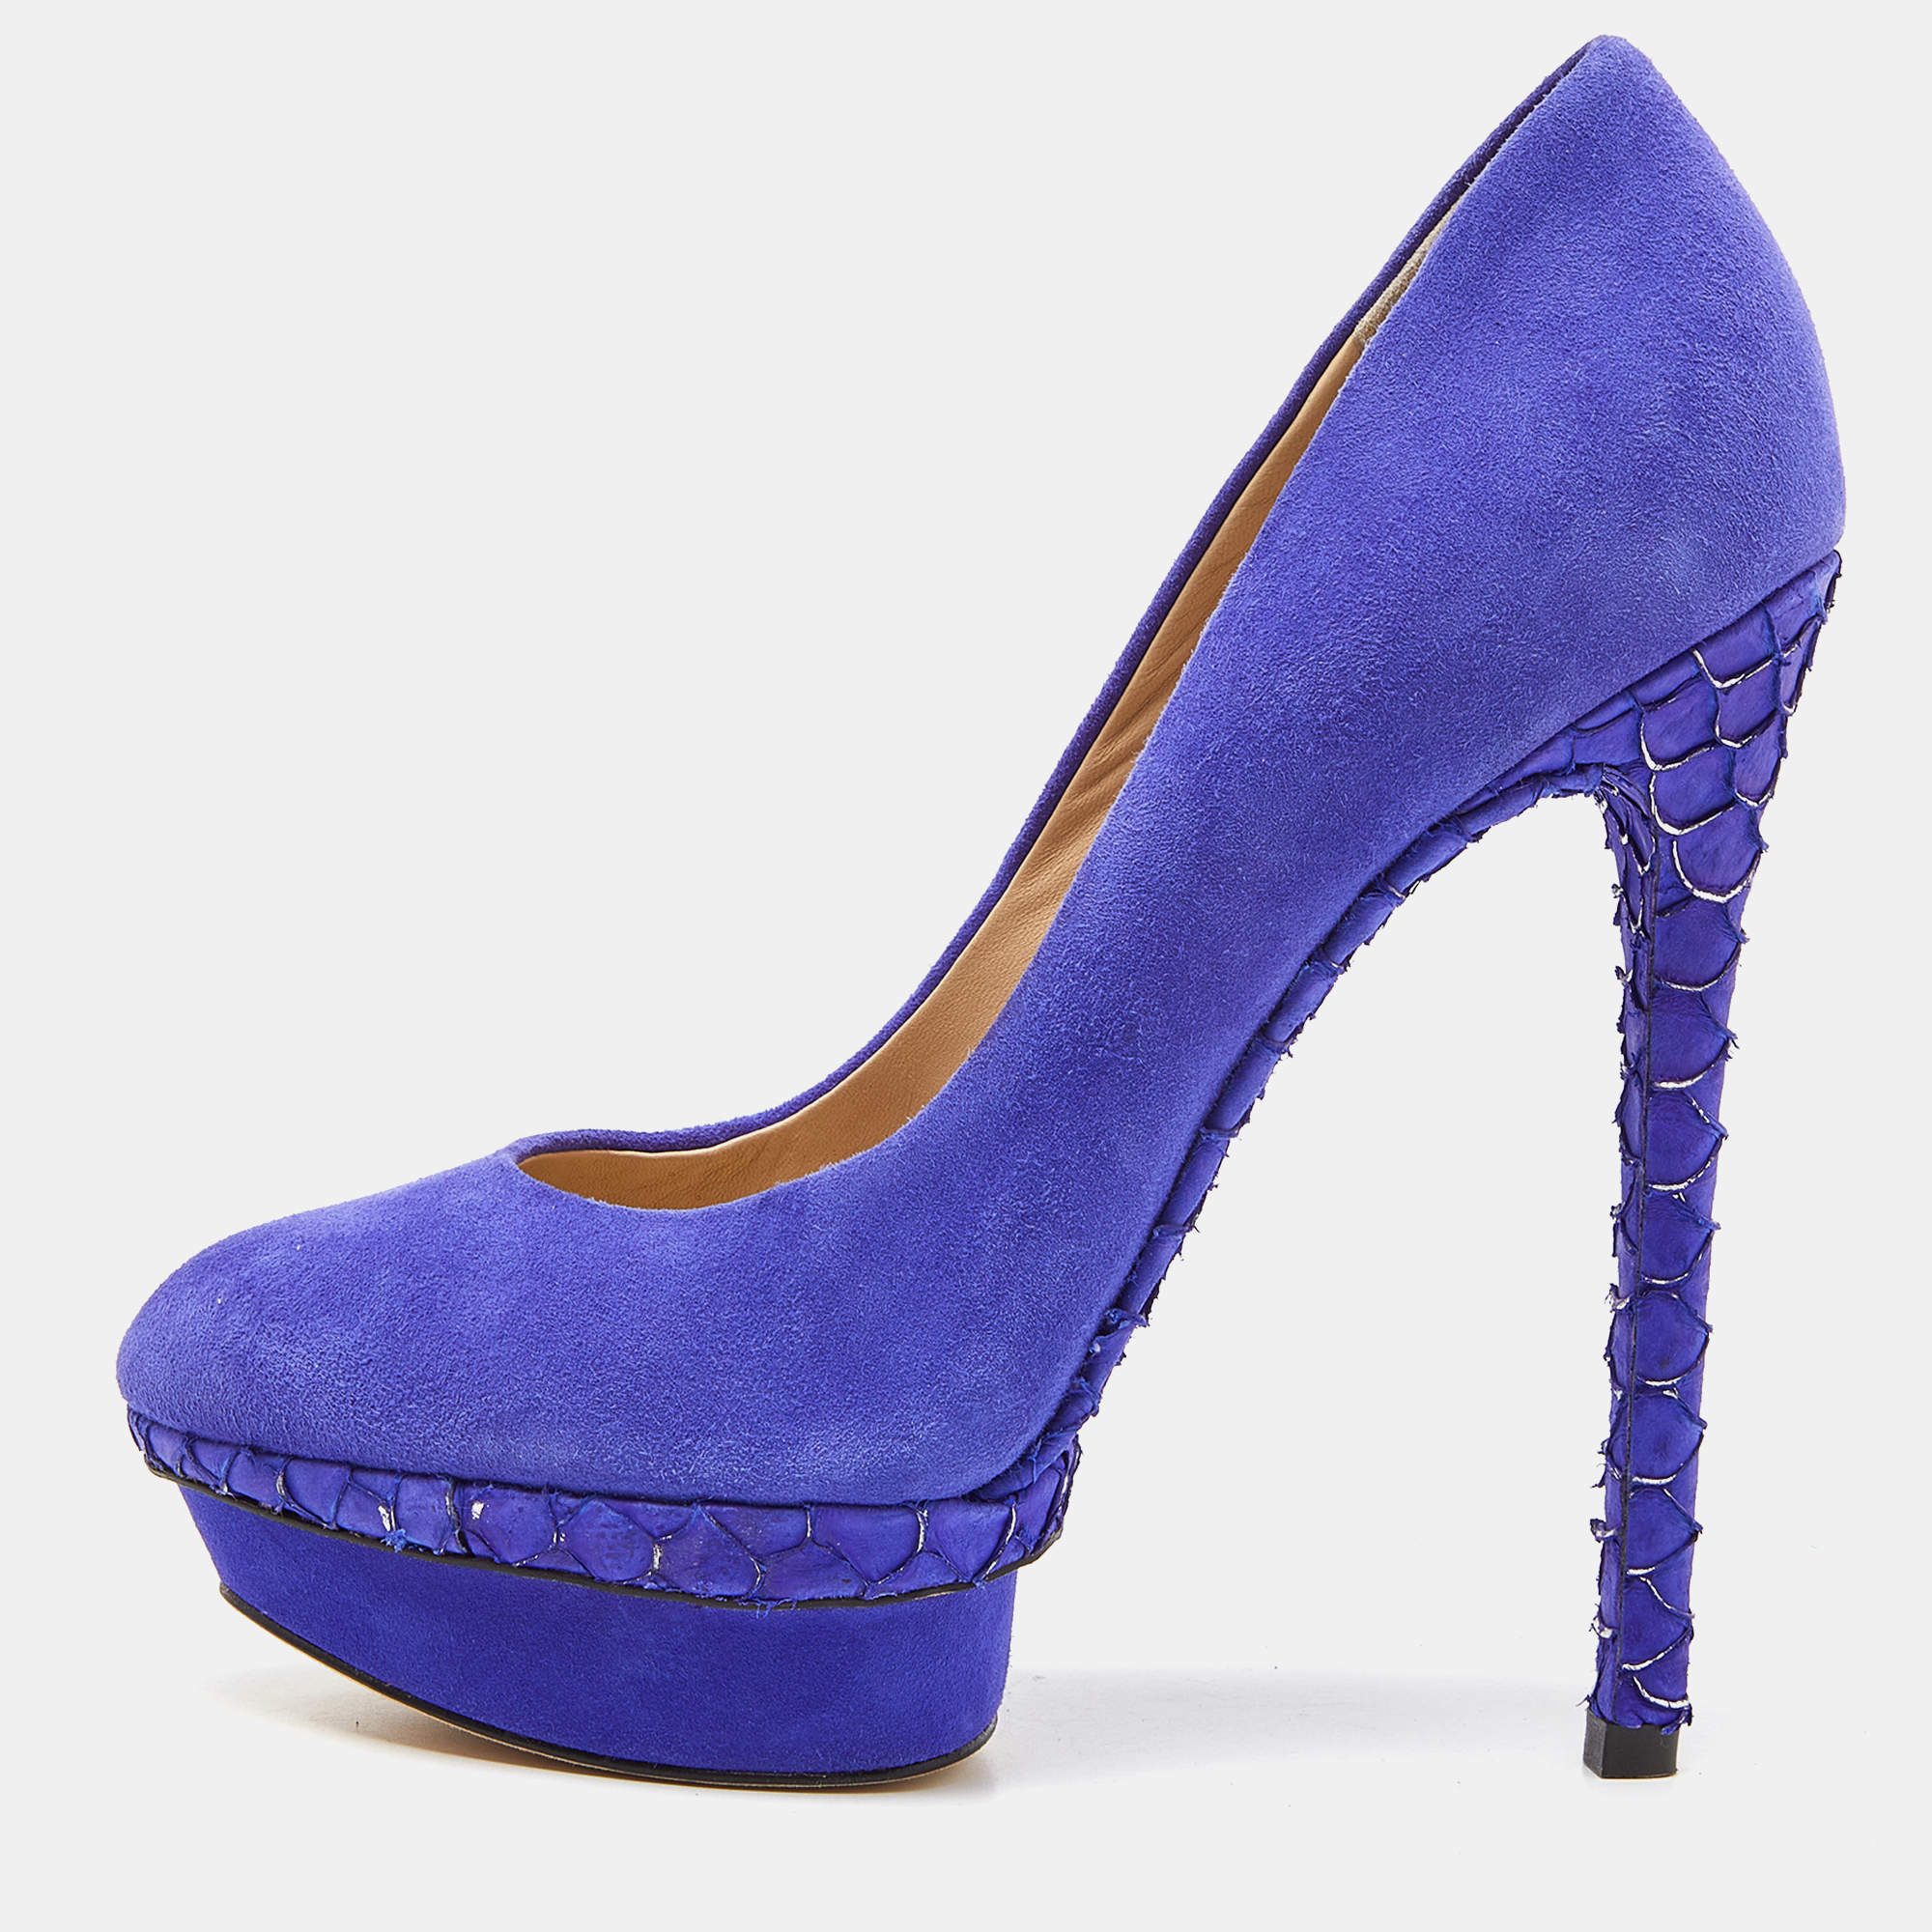 Brian Atwood Blue Suede and Snakeskin Embossed Leather Platform Pumps Size 37